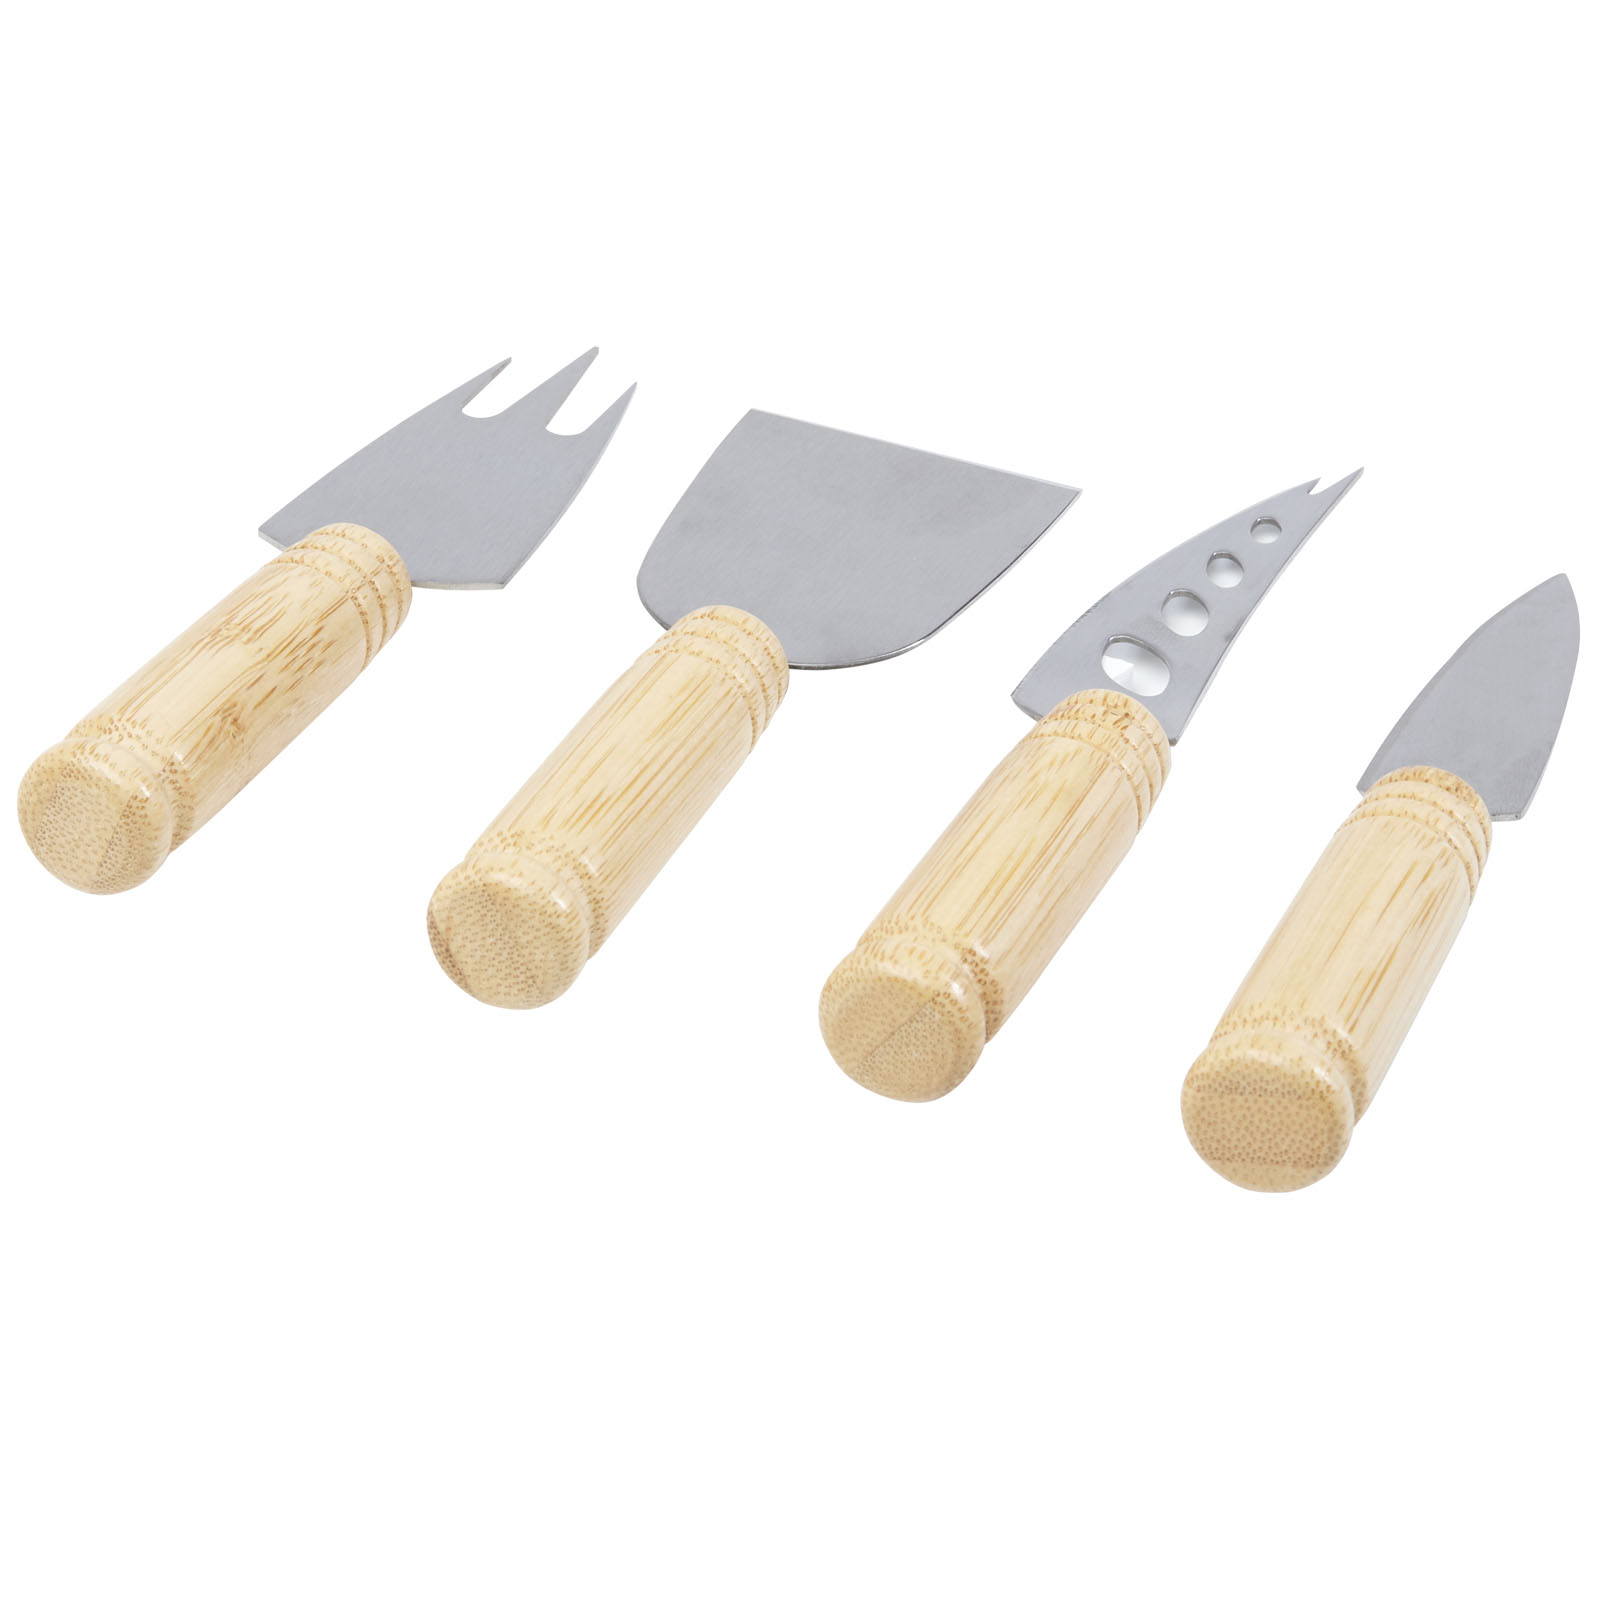 Advertising Kitchenware - Cheds 4-piece bamboo cheese set